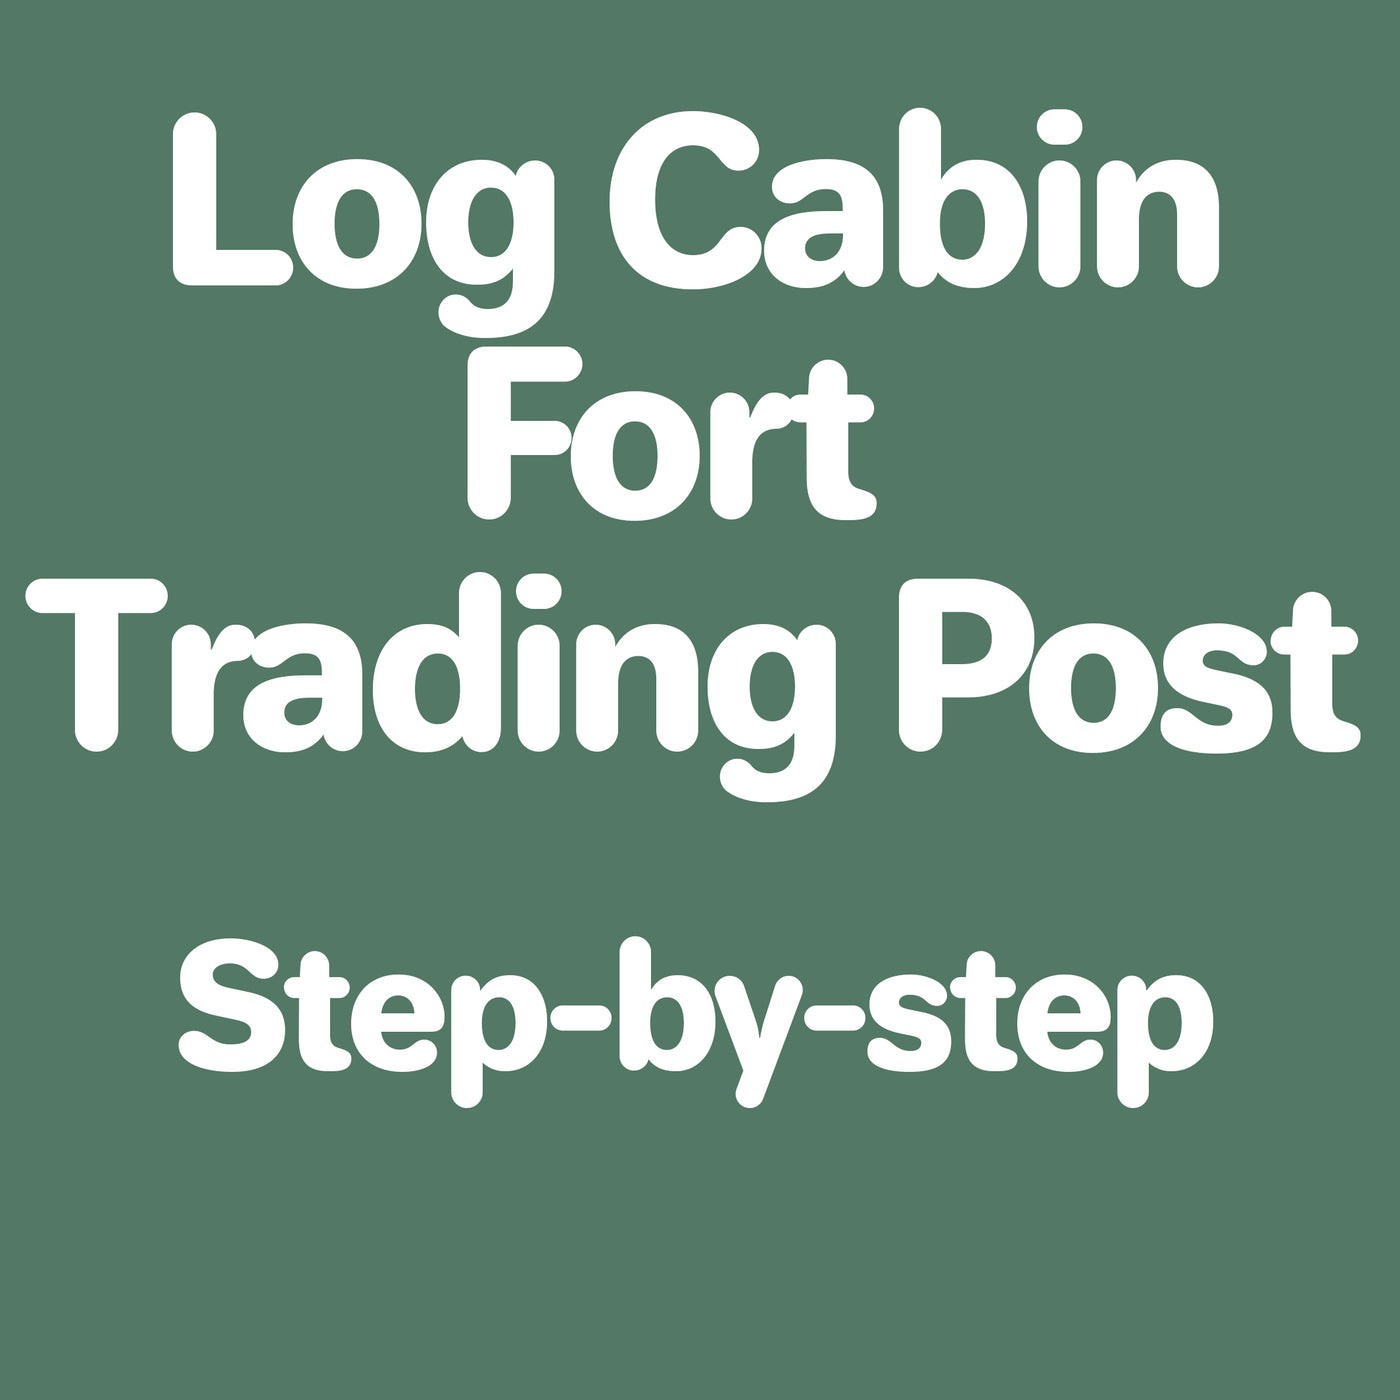 Fort Trading Post